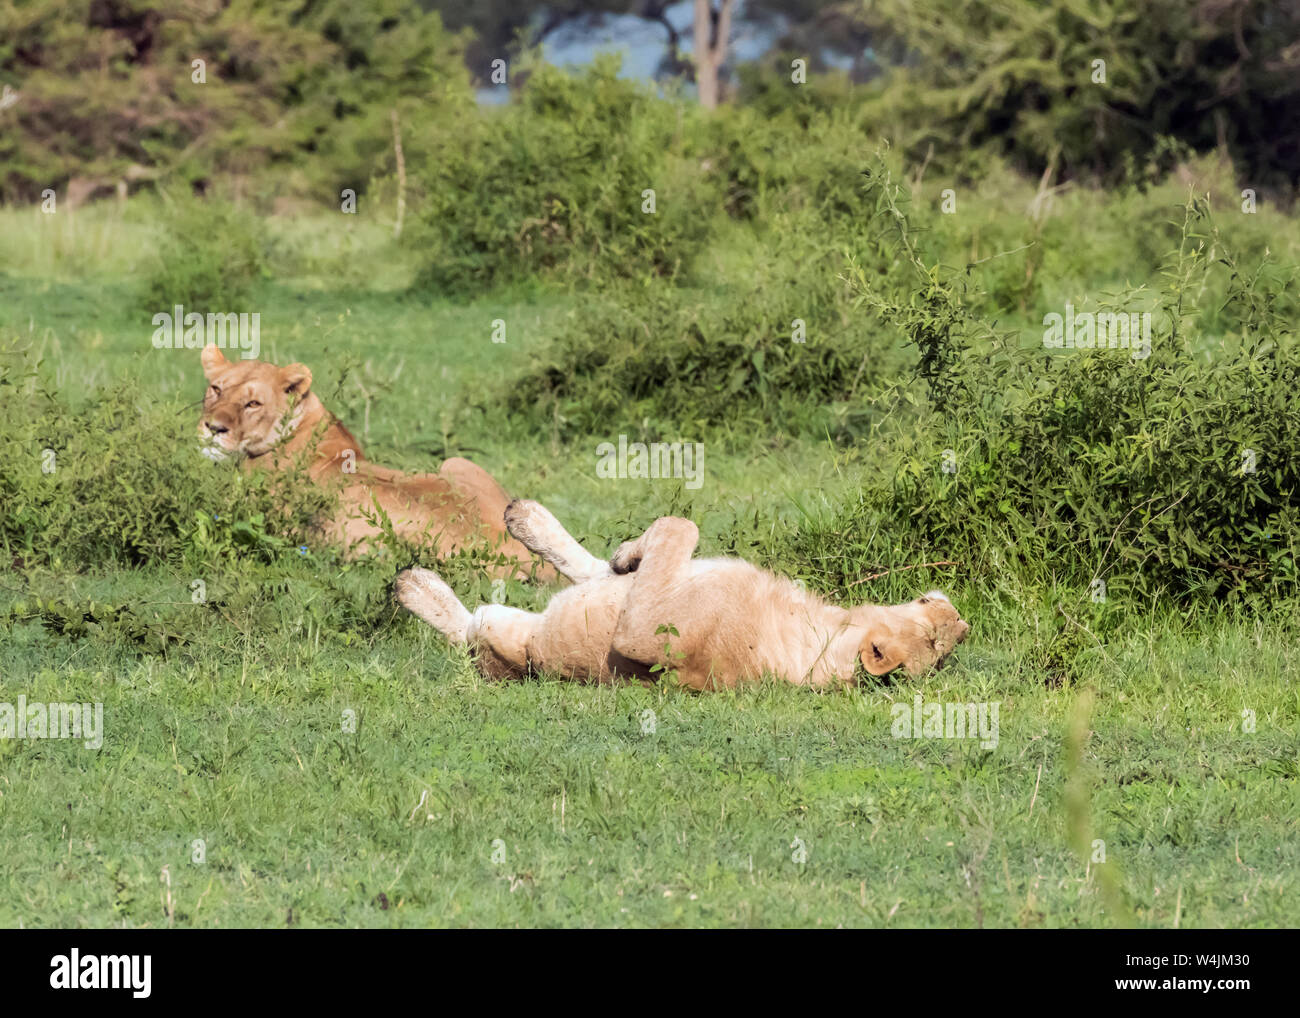 One lion relaxing while the other keeps watch, Grumeti Game Reserve, Serengeti, Tanzania Stock Photo